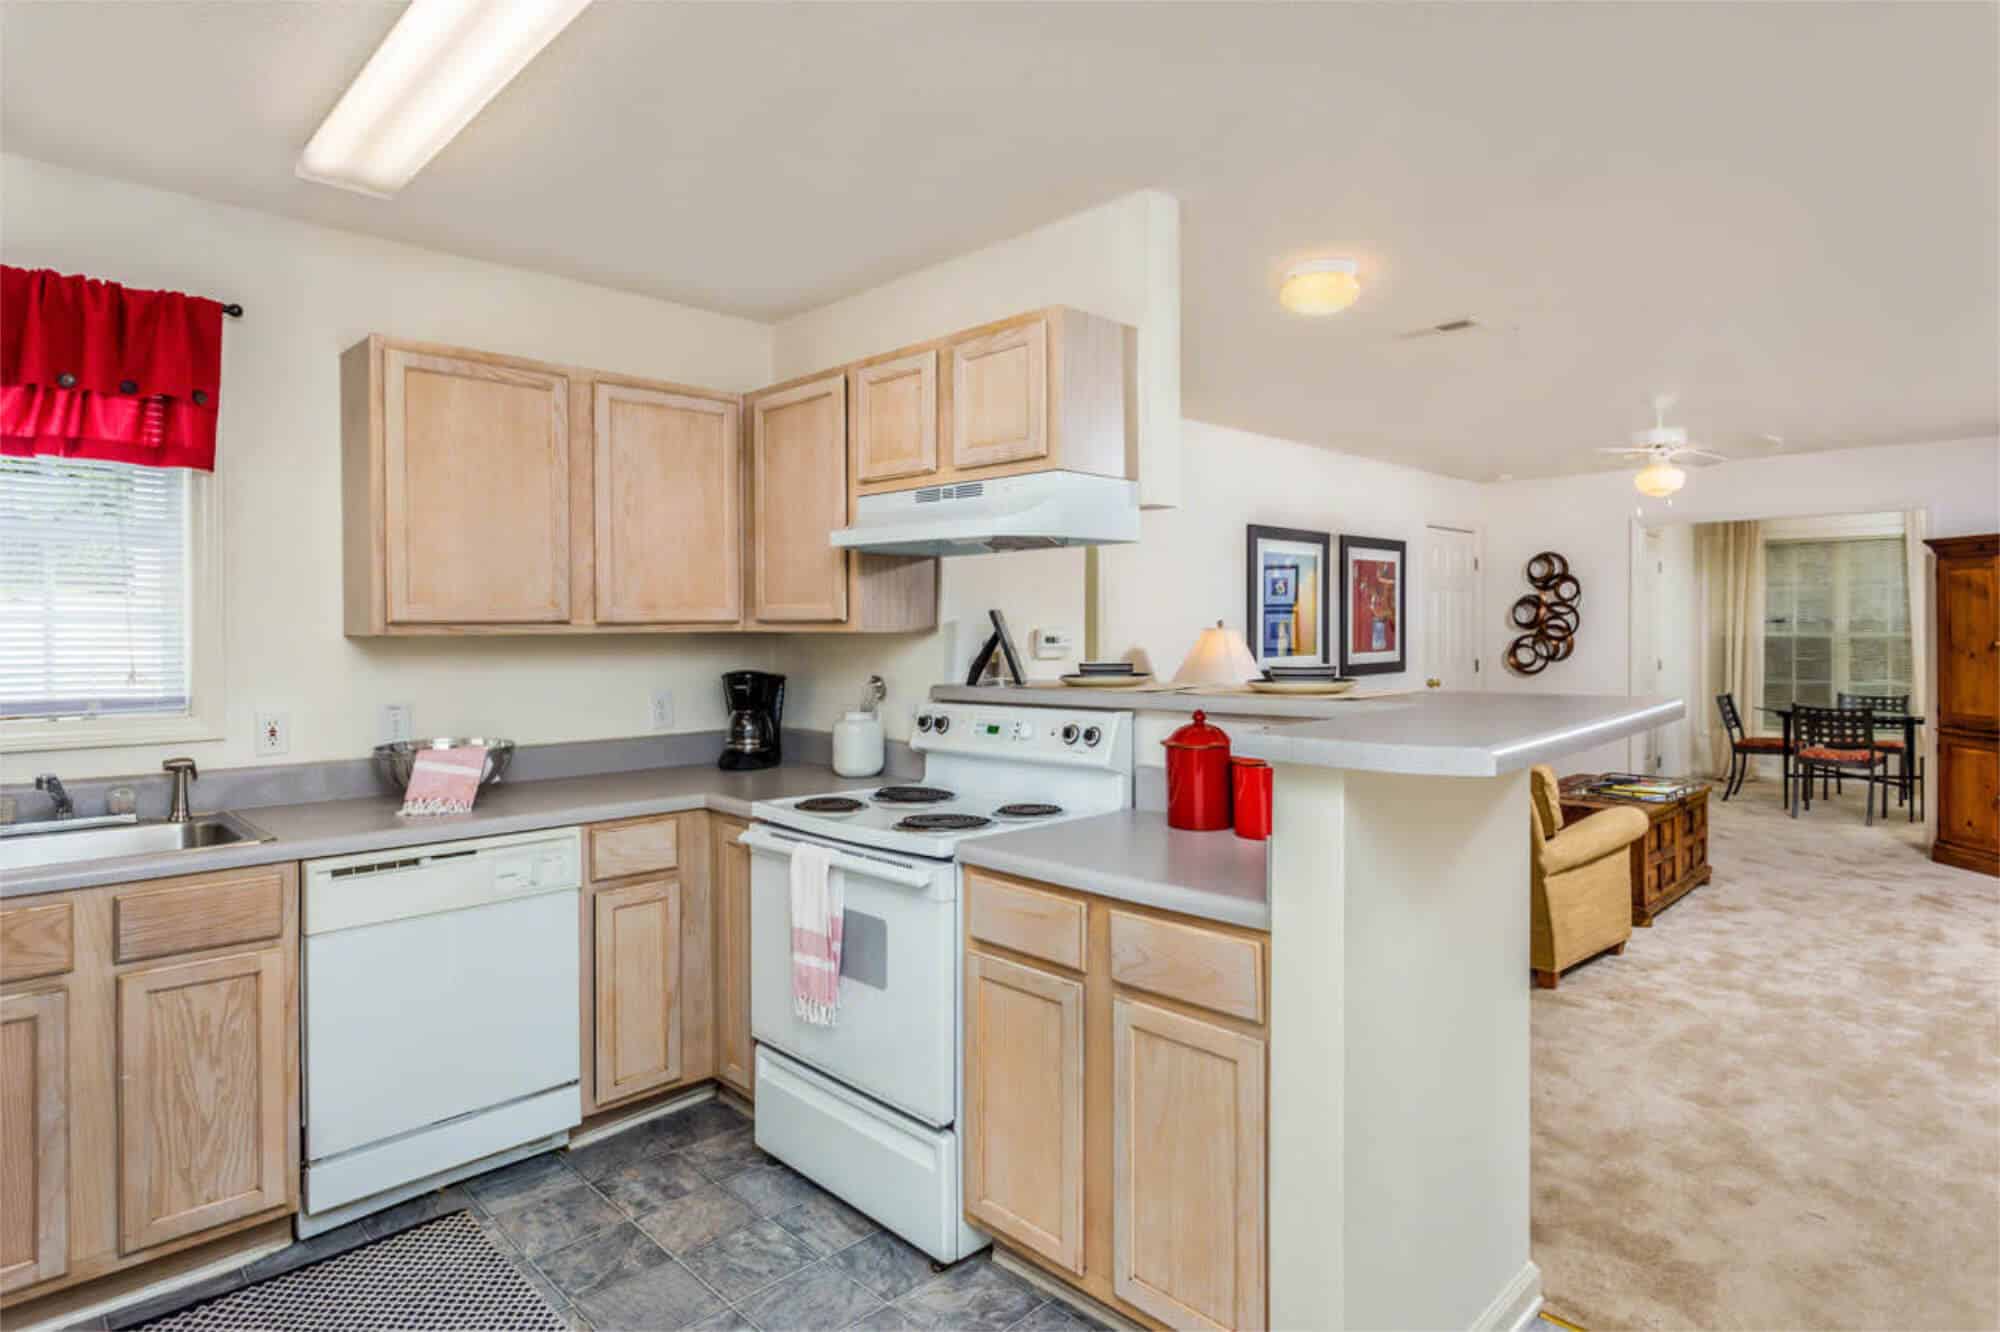 raleigh off campus apartments near nc state university full kitchen